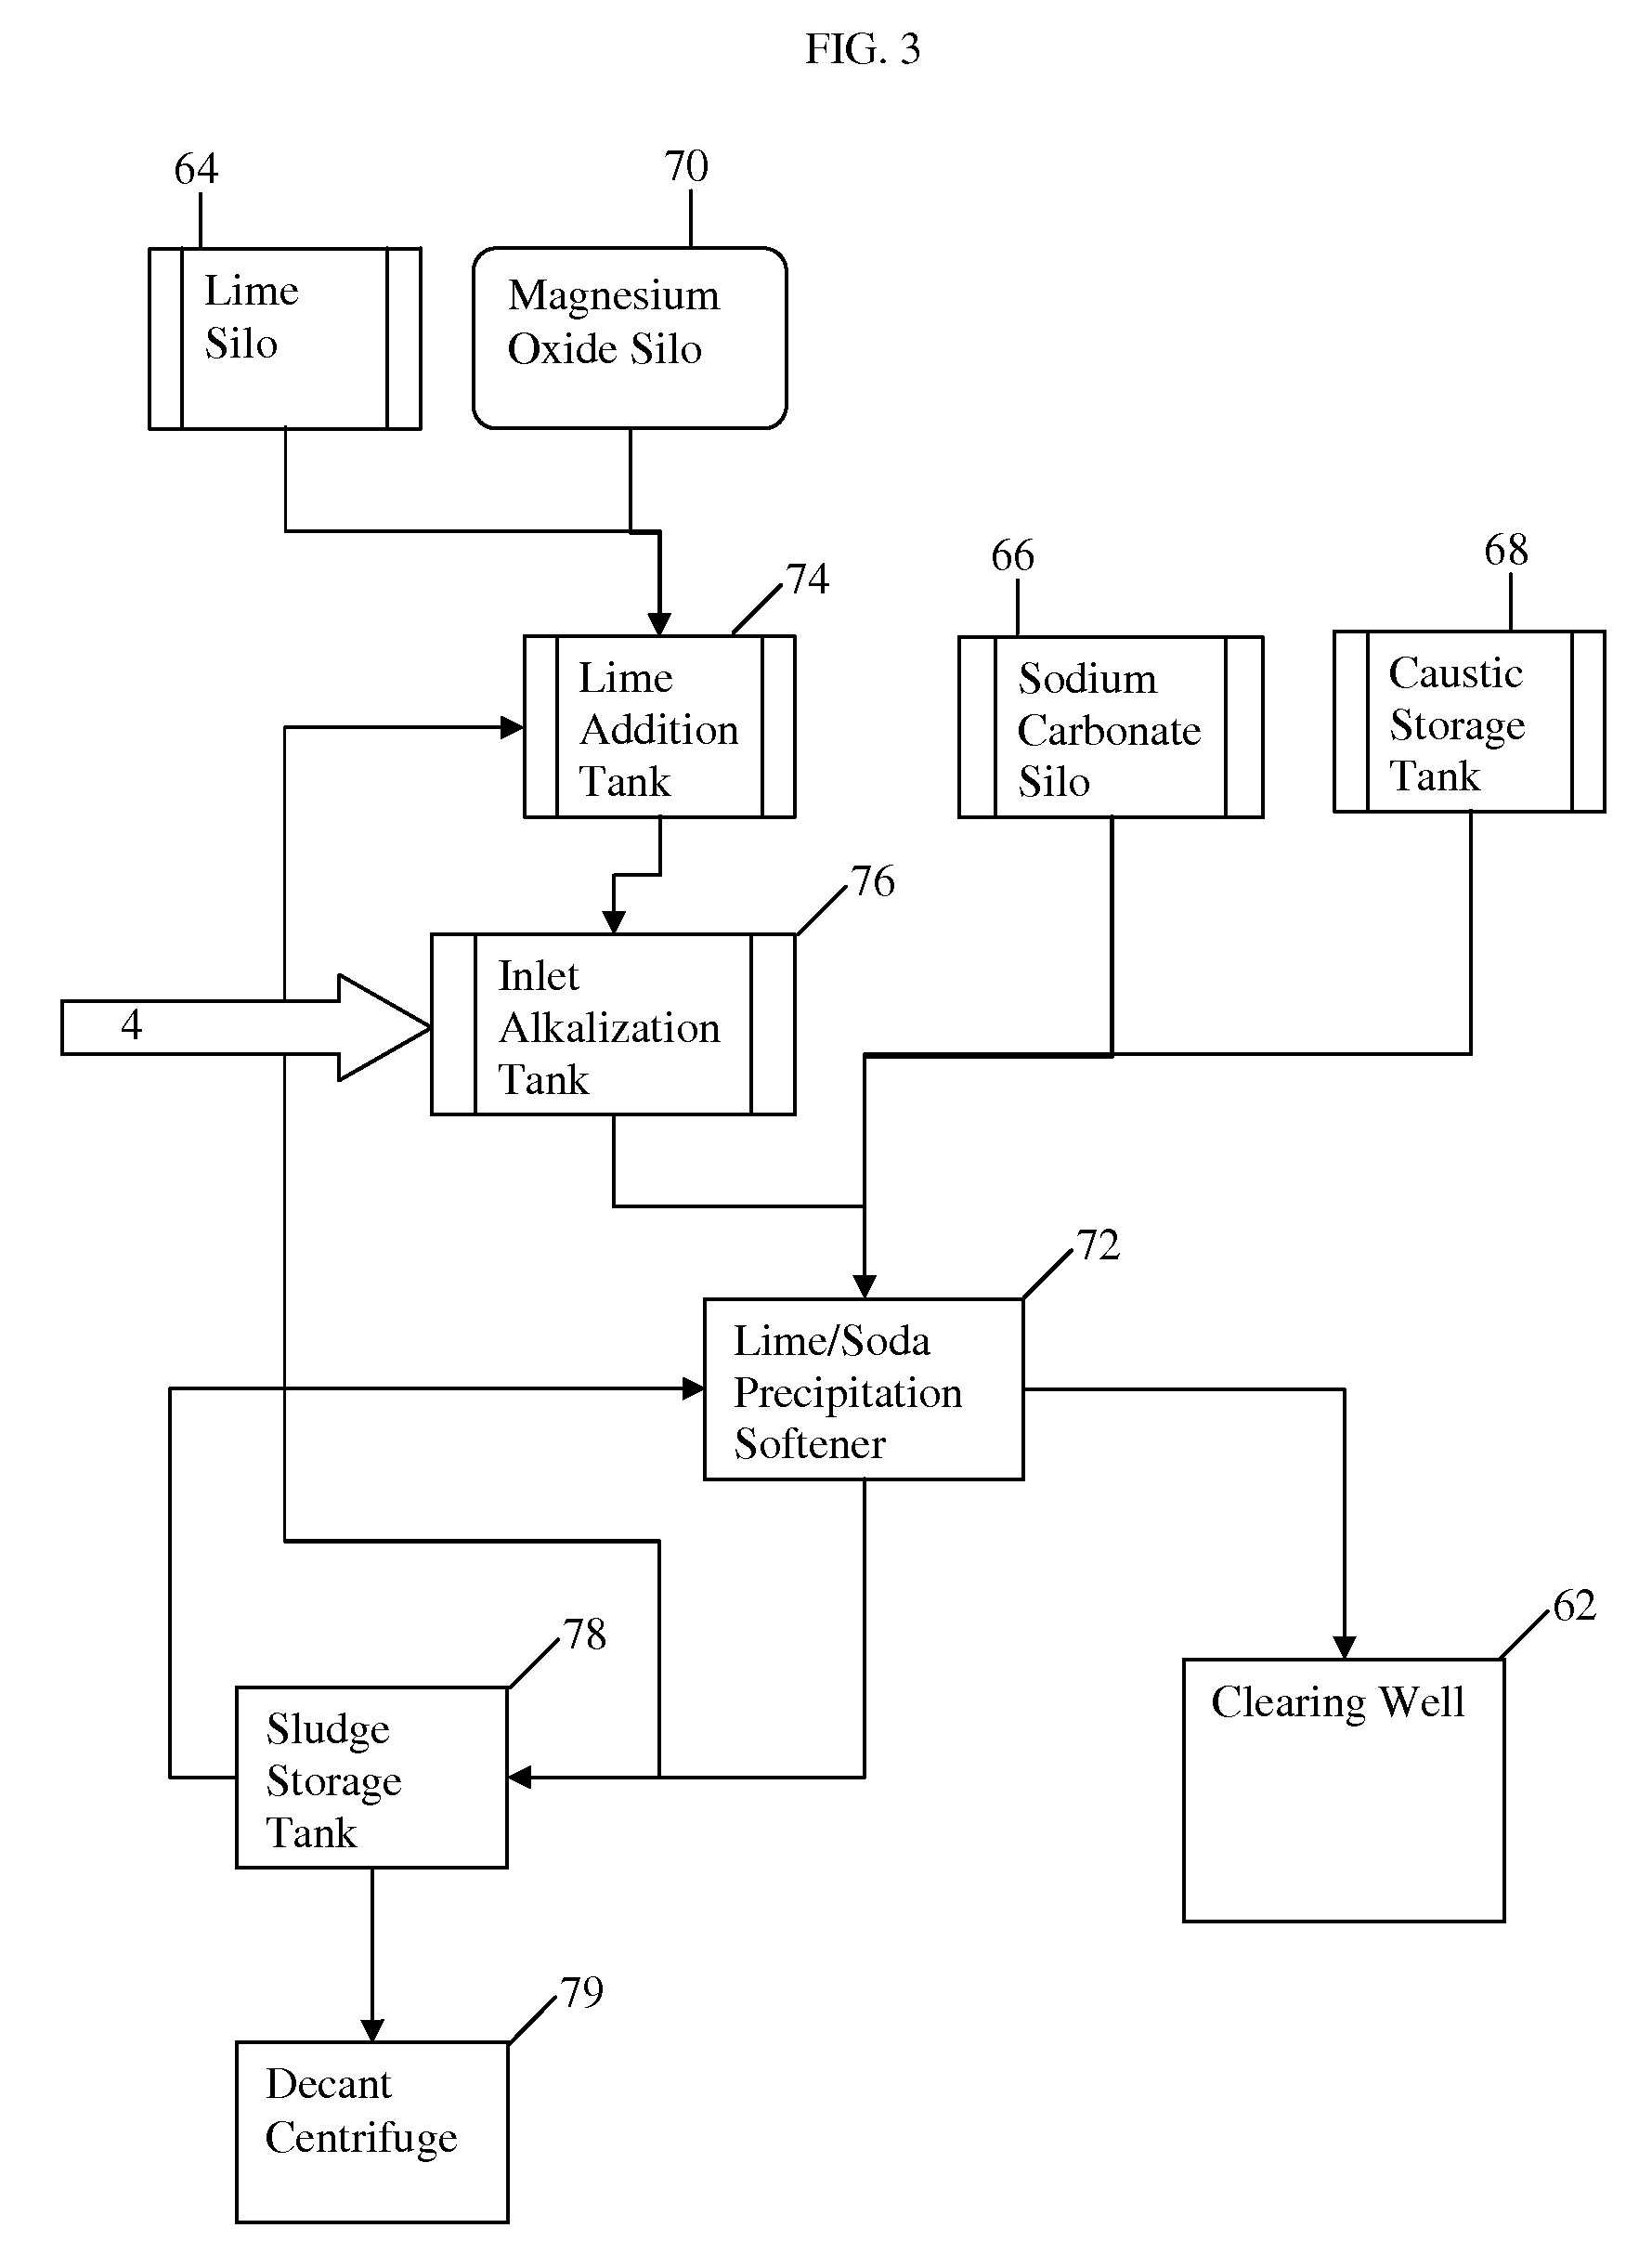 Water treatment process for oilfield produced water